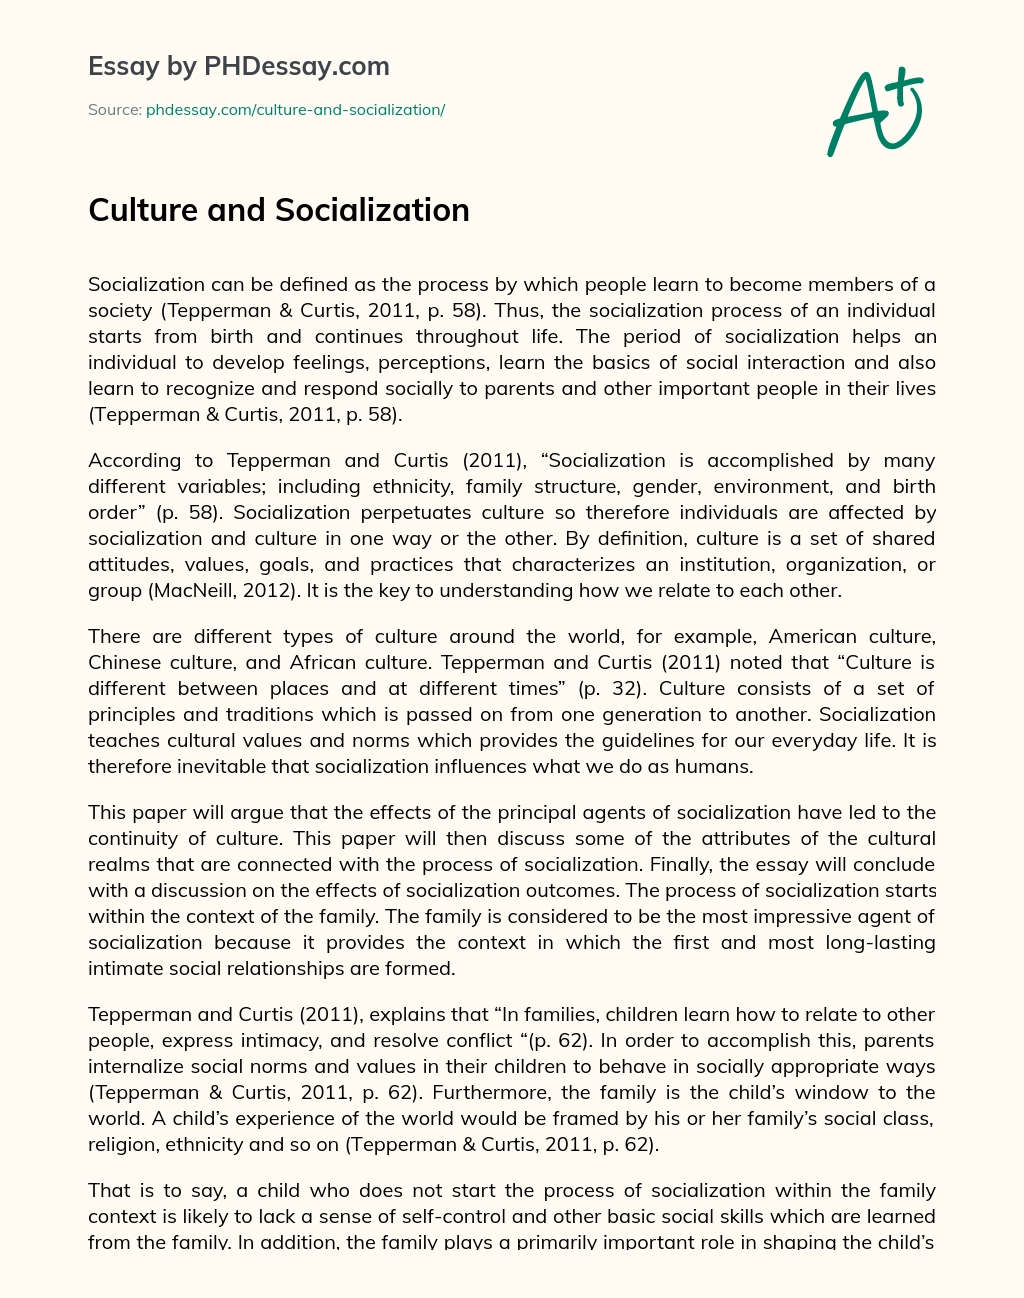 Реферат: Socialization Essay Research Paper With socialization learning